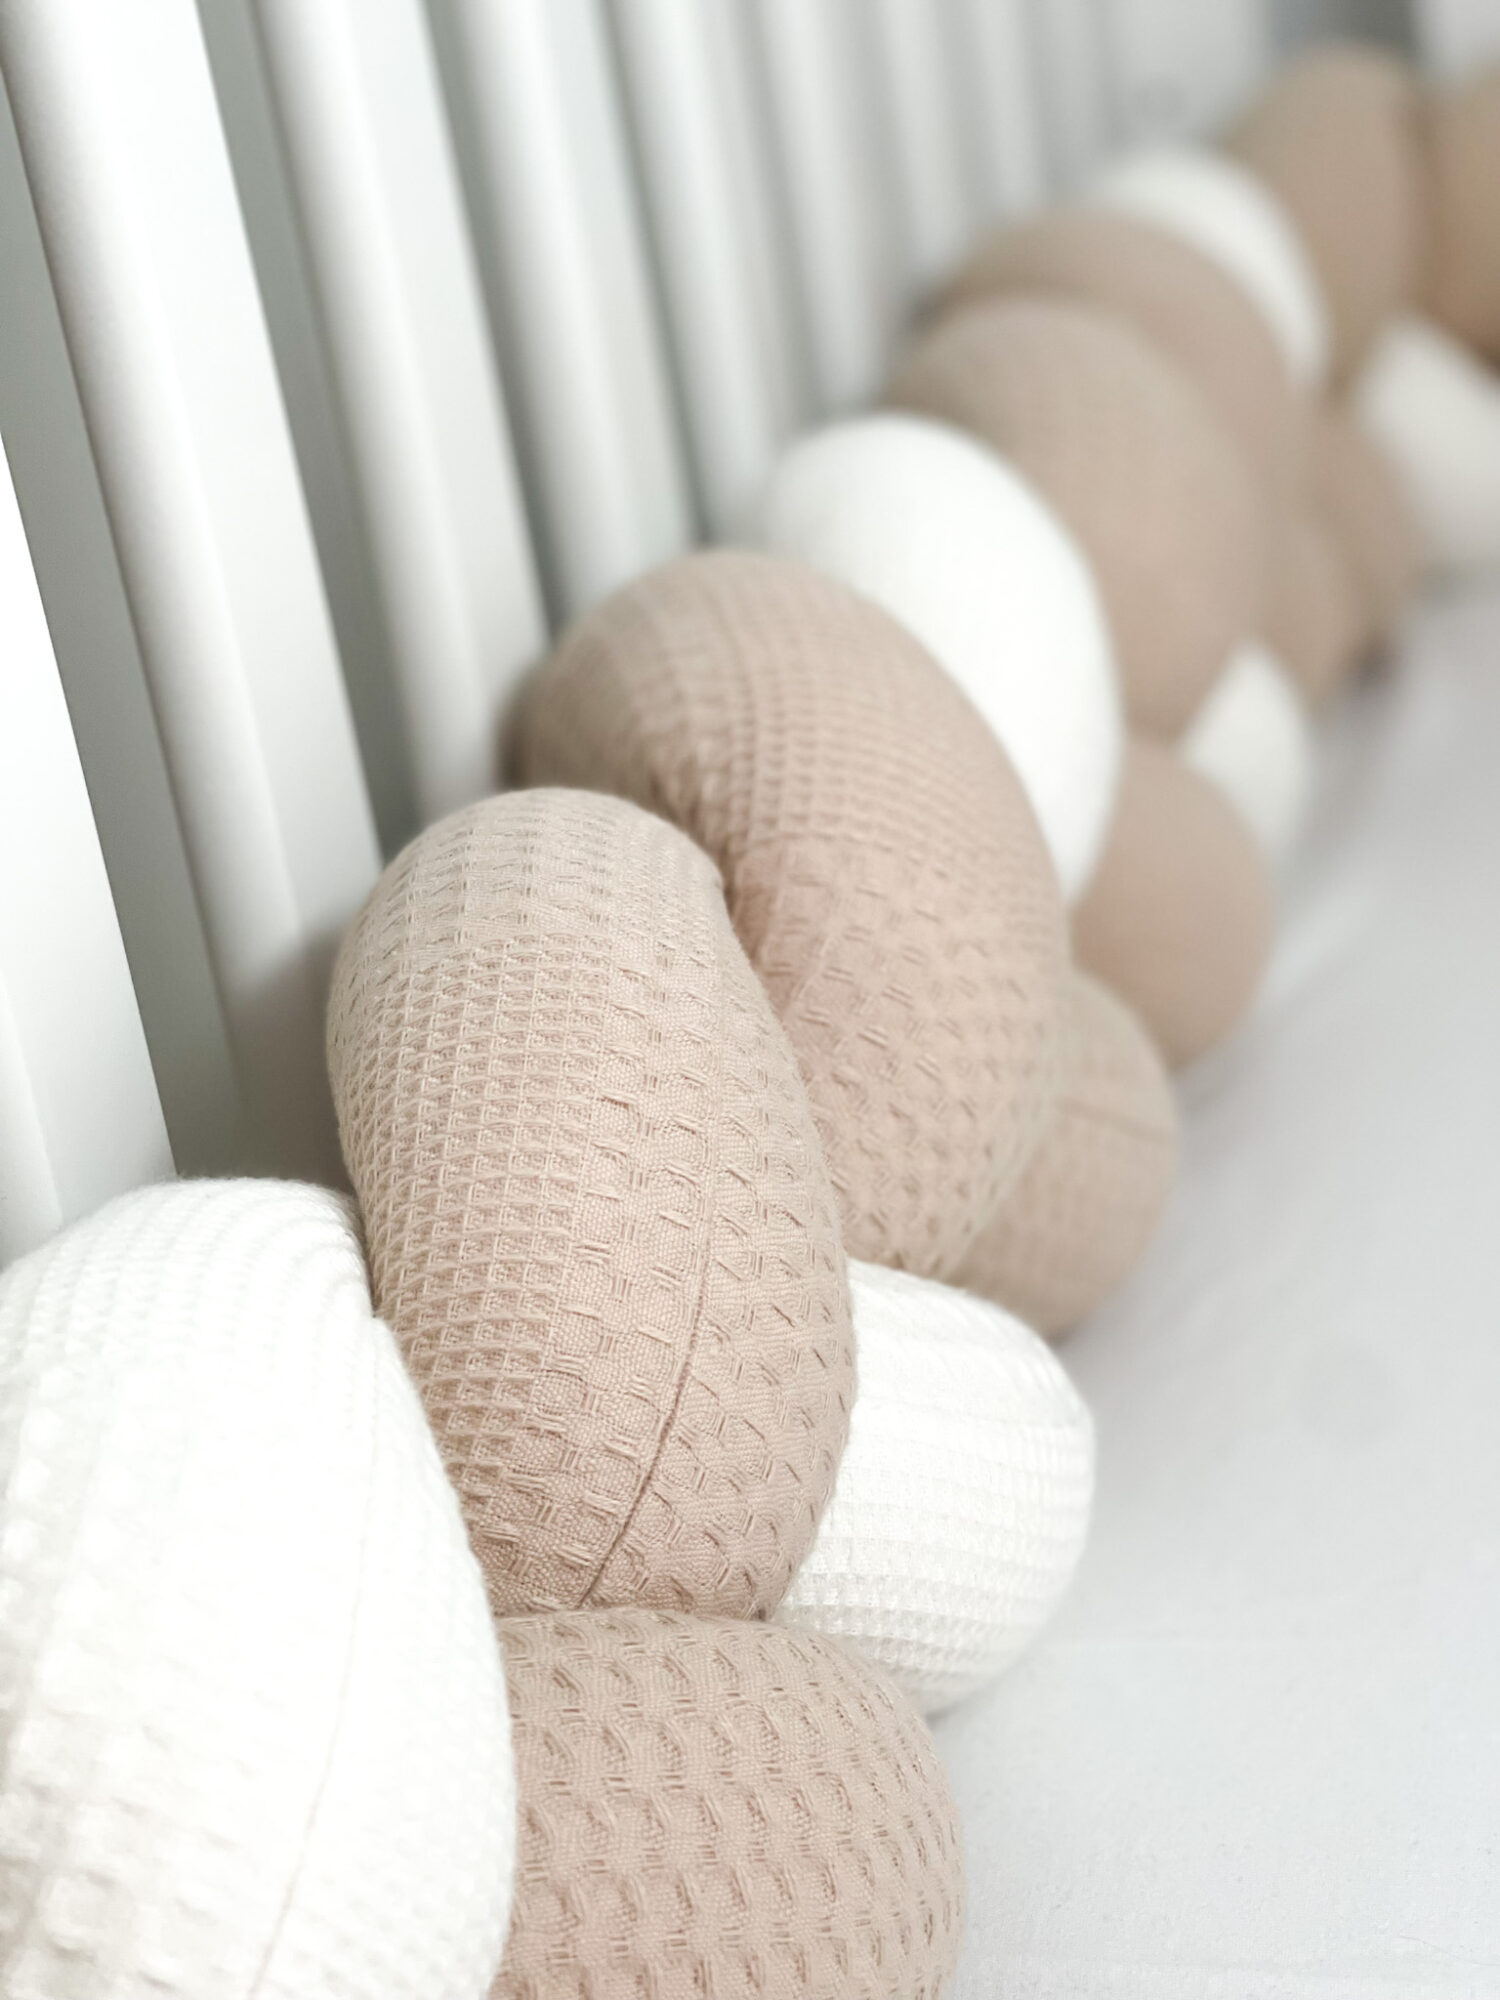 Beige and white Braided Bed Bumper with waffle pattern on display in a baby bed